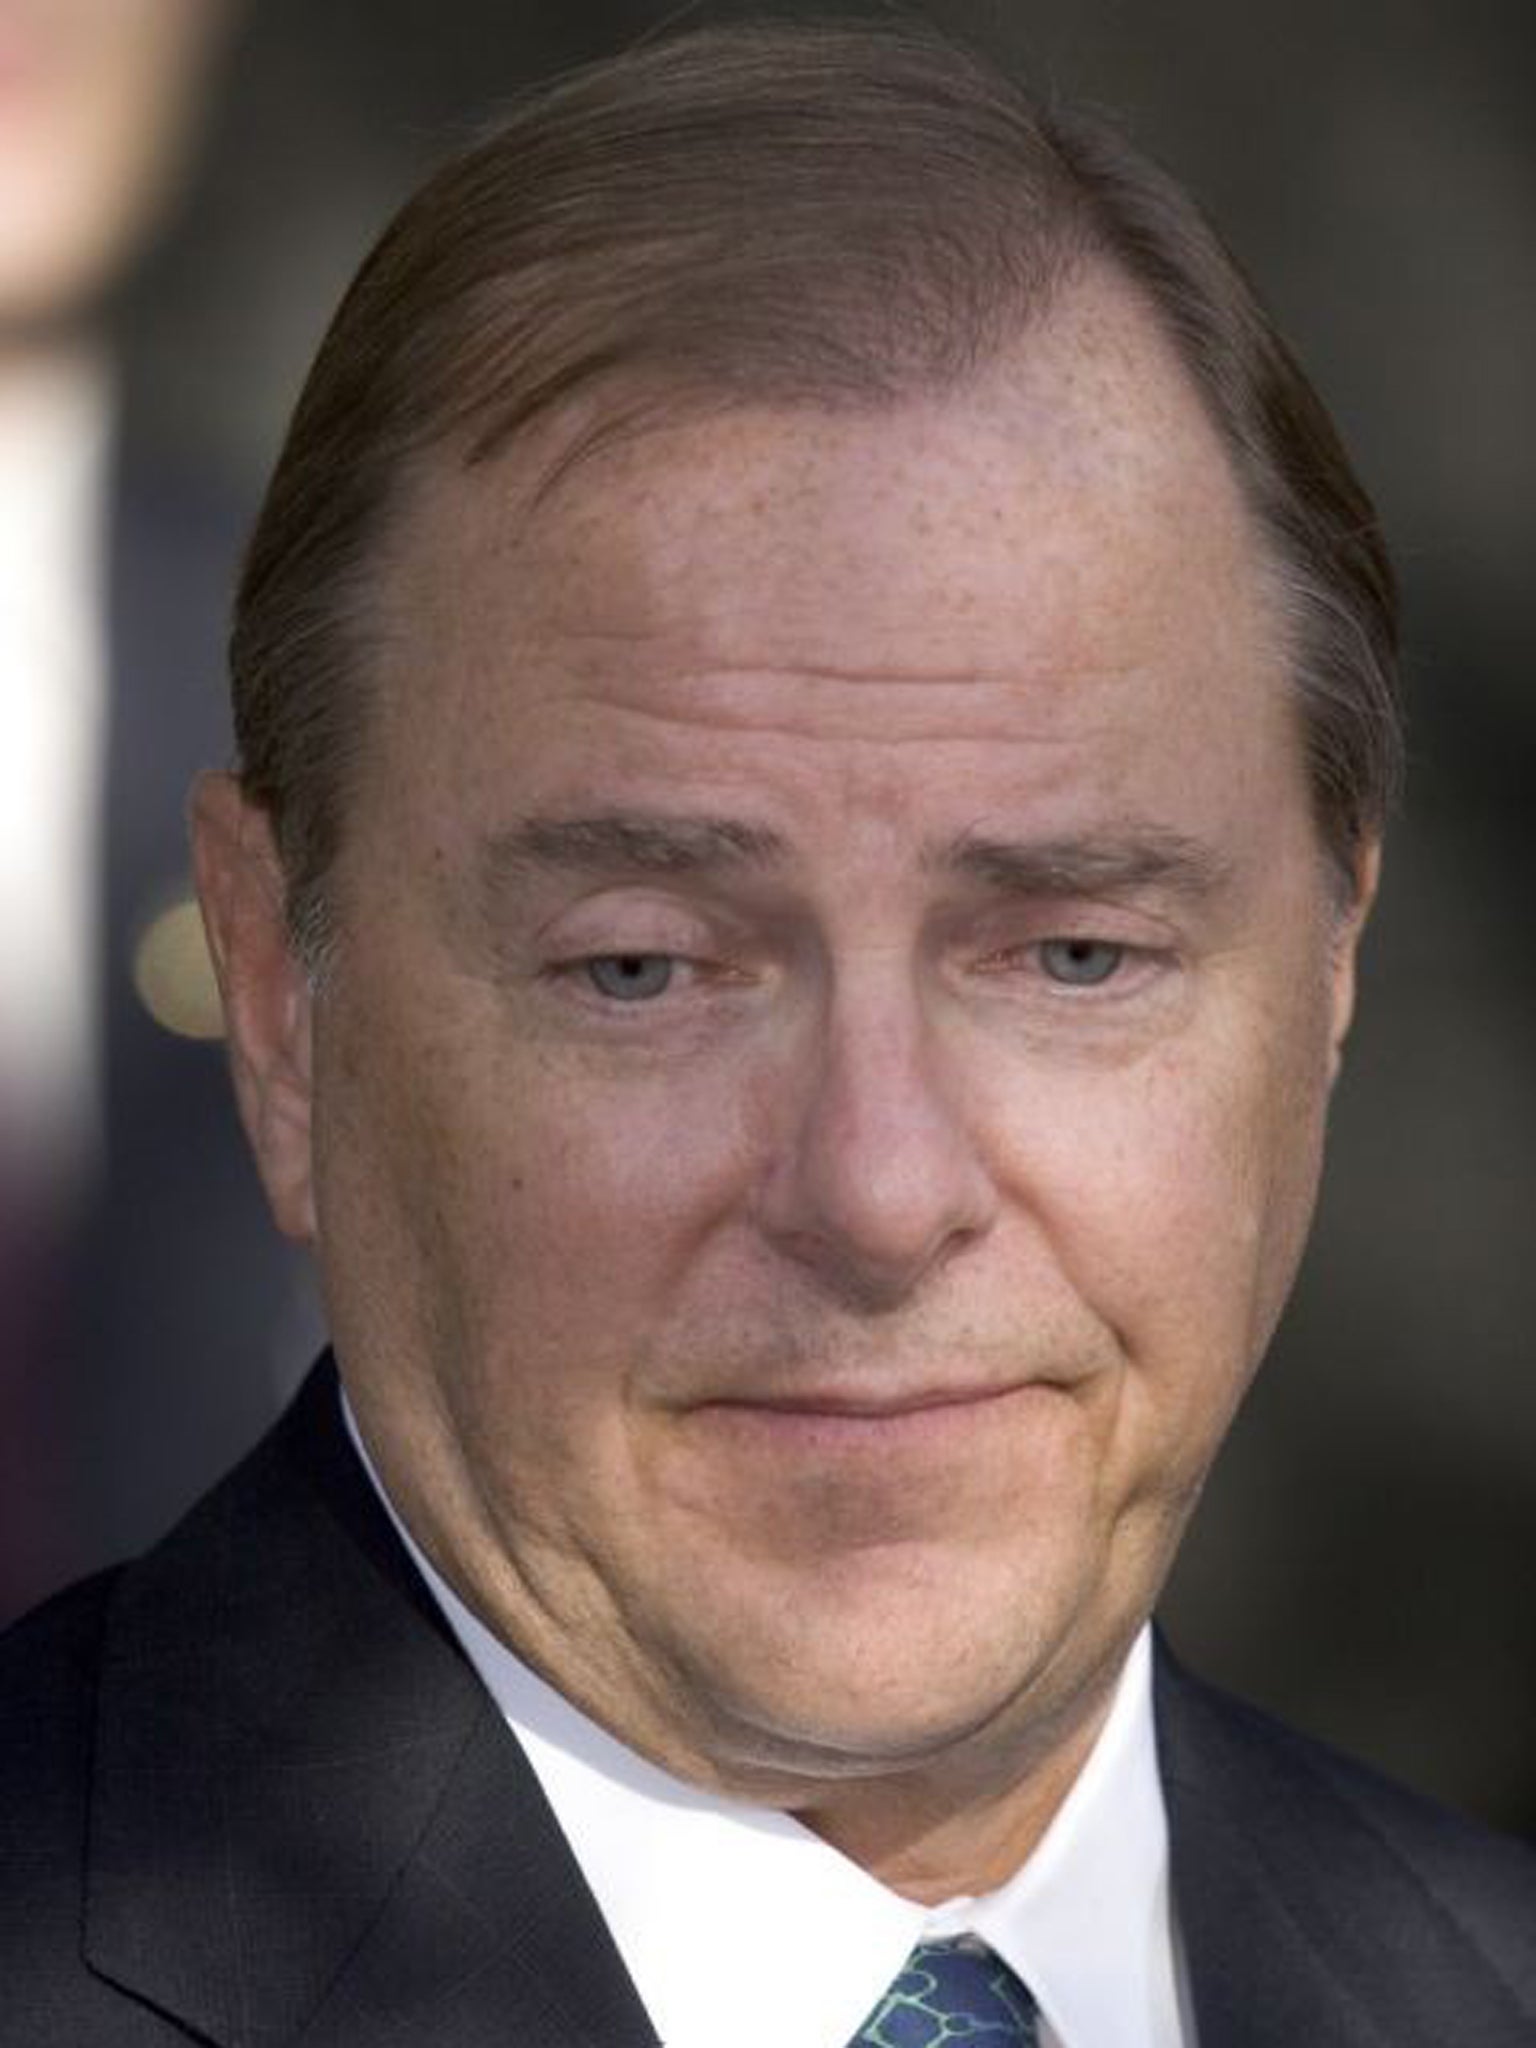 Former Enron chief executive Jeffrey Skilling could be released before the end of the decade